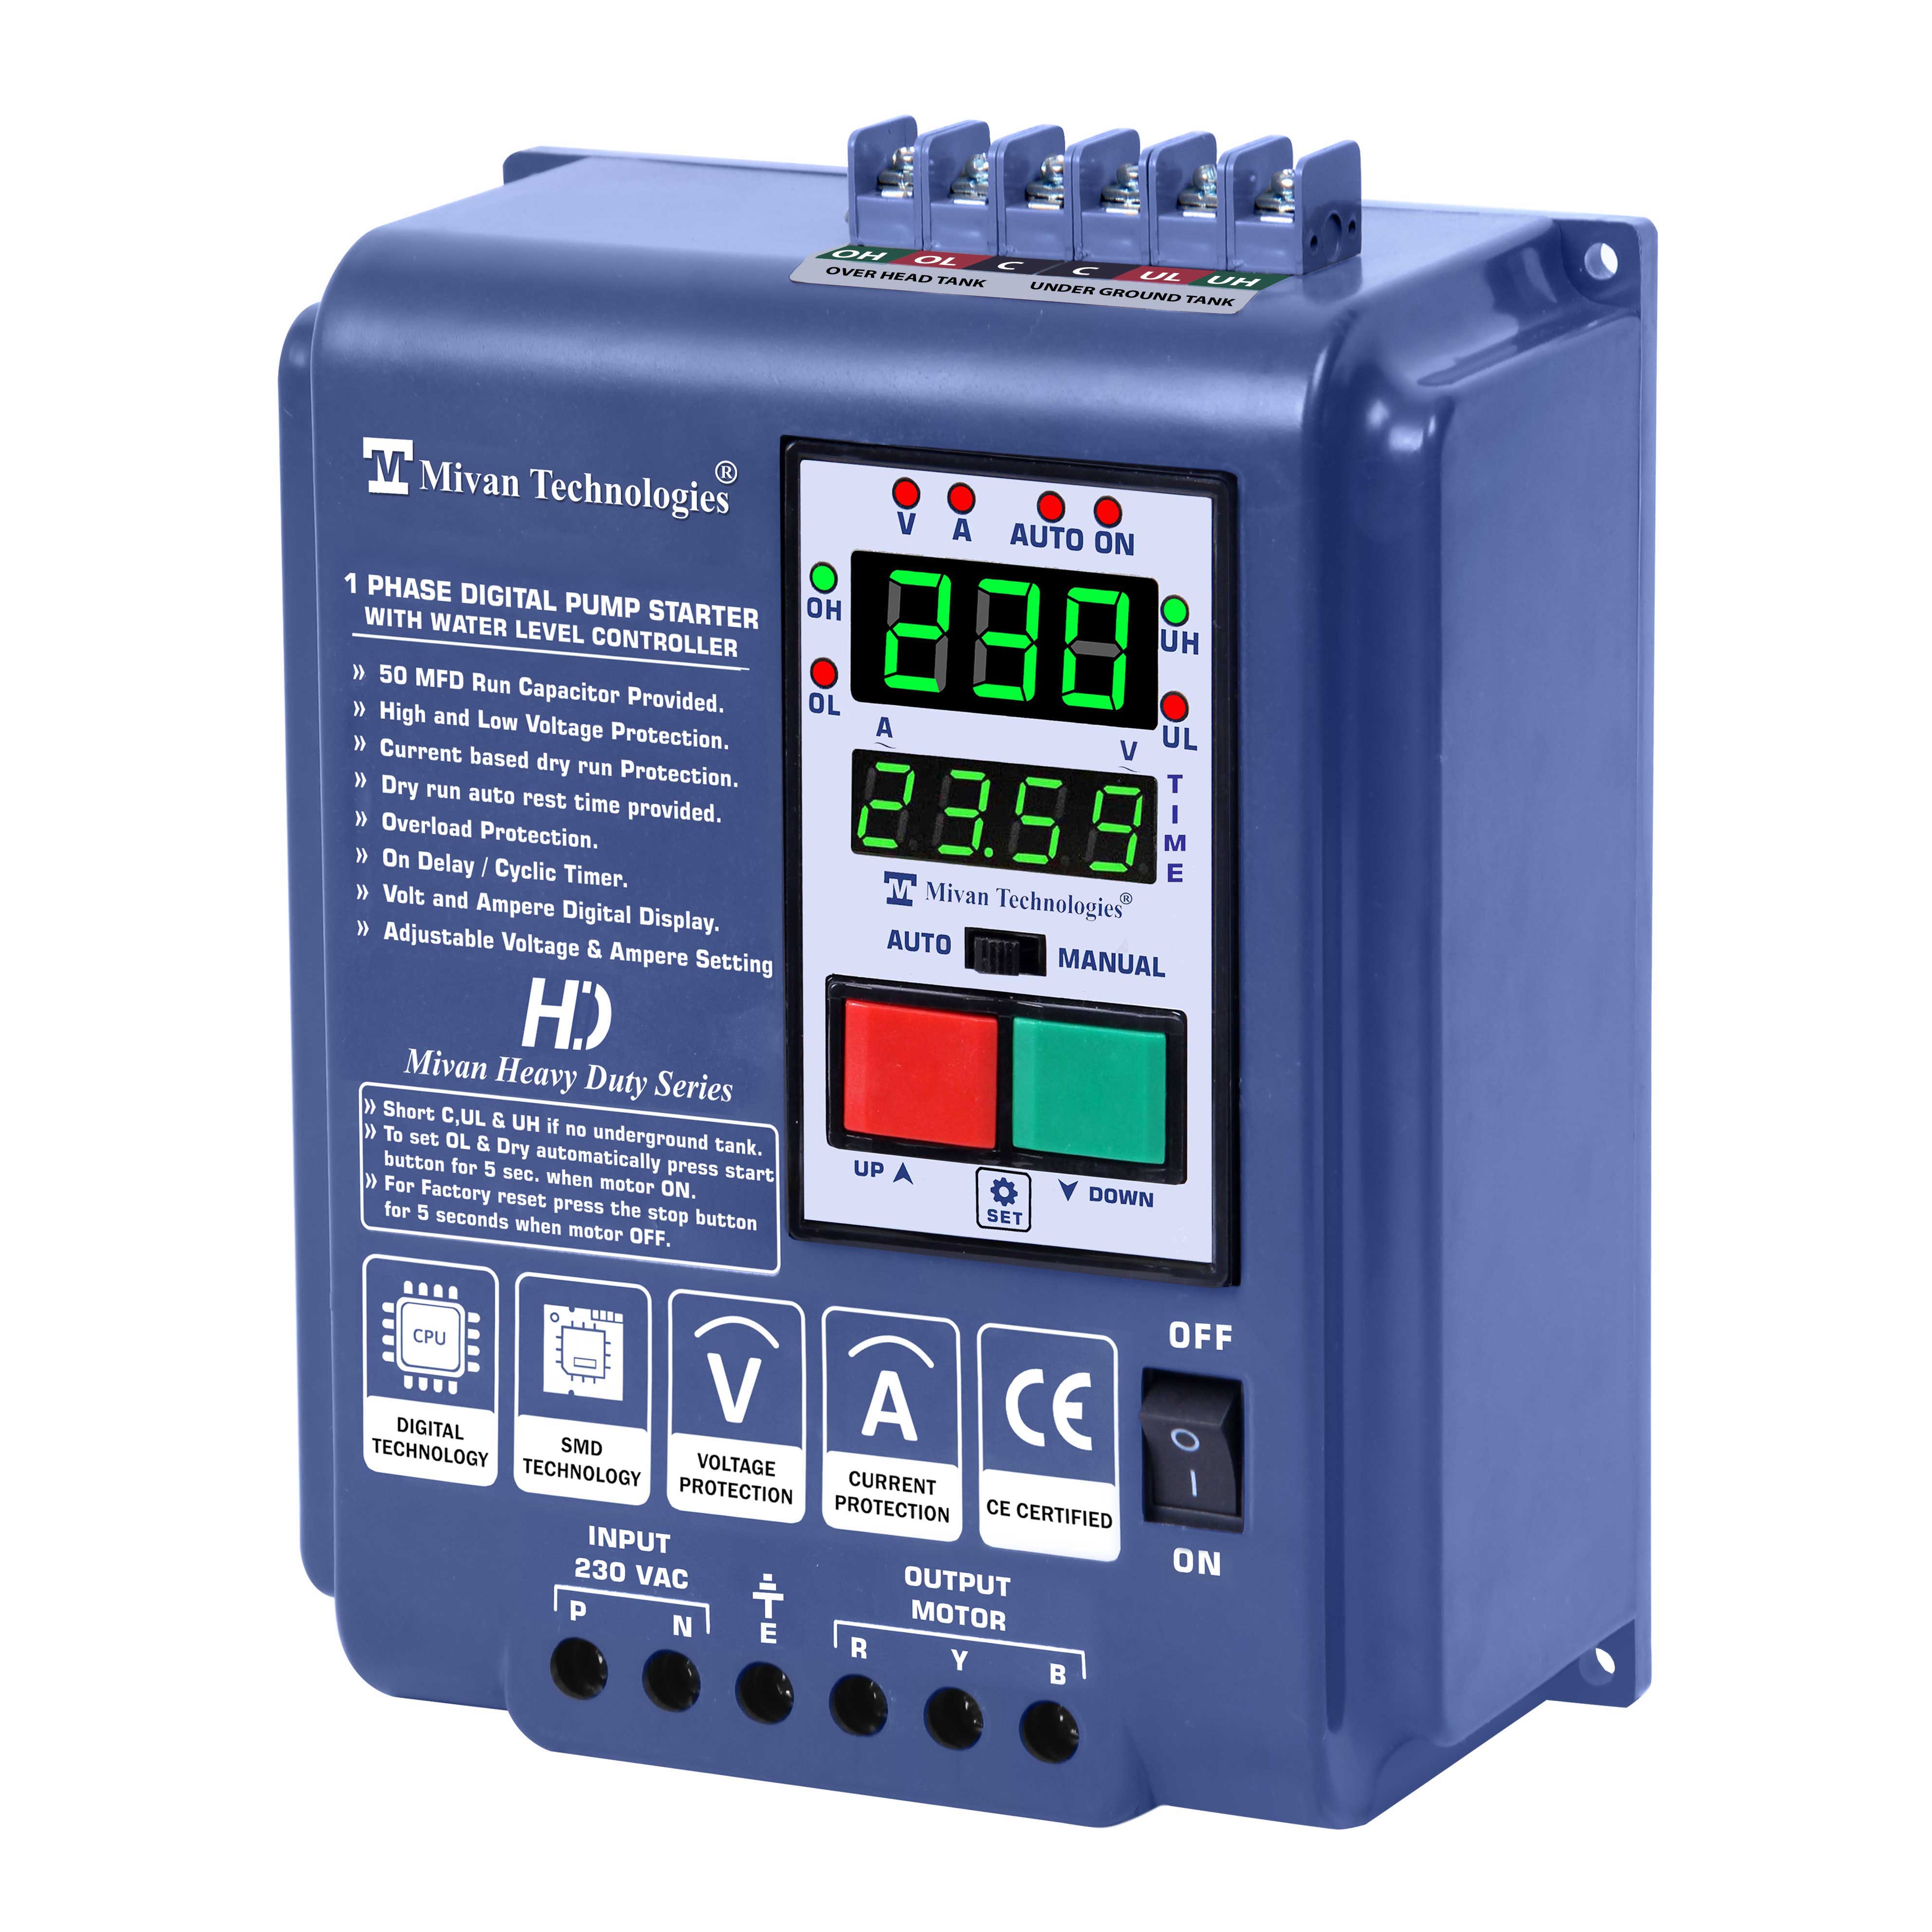 DSL R RTC HD Digital water level controller with REAL TIME TIMER with single phase starter with V A meter with HV LV OL DRY PROTECTION with cyclic TIMER